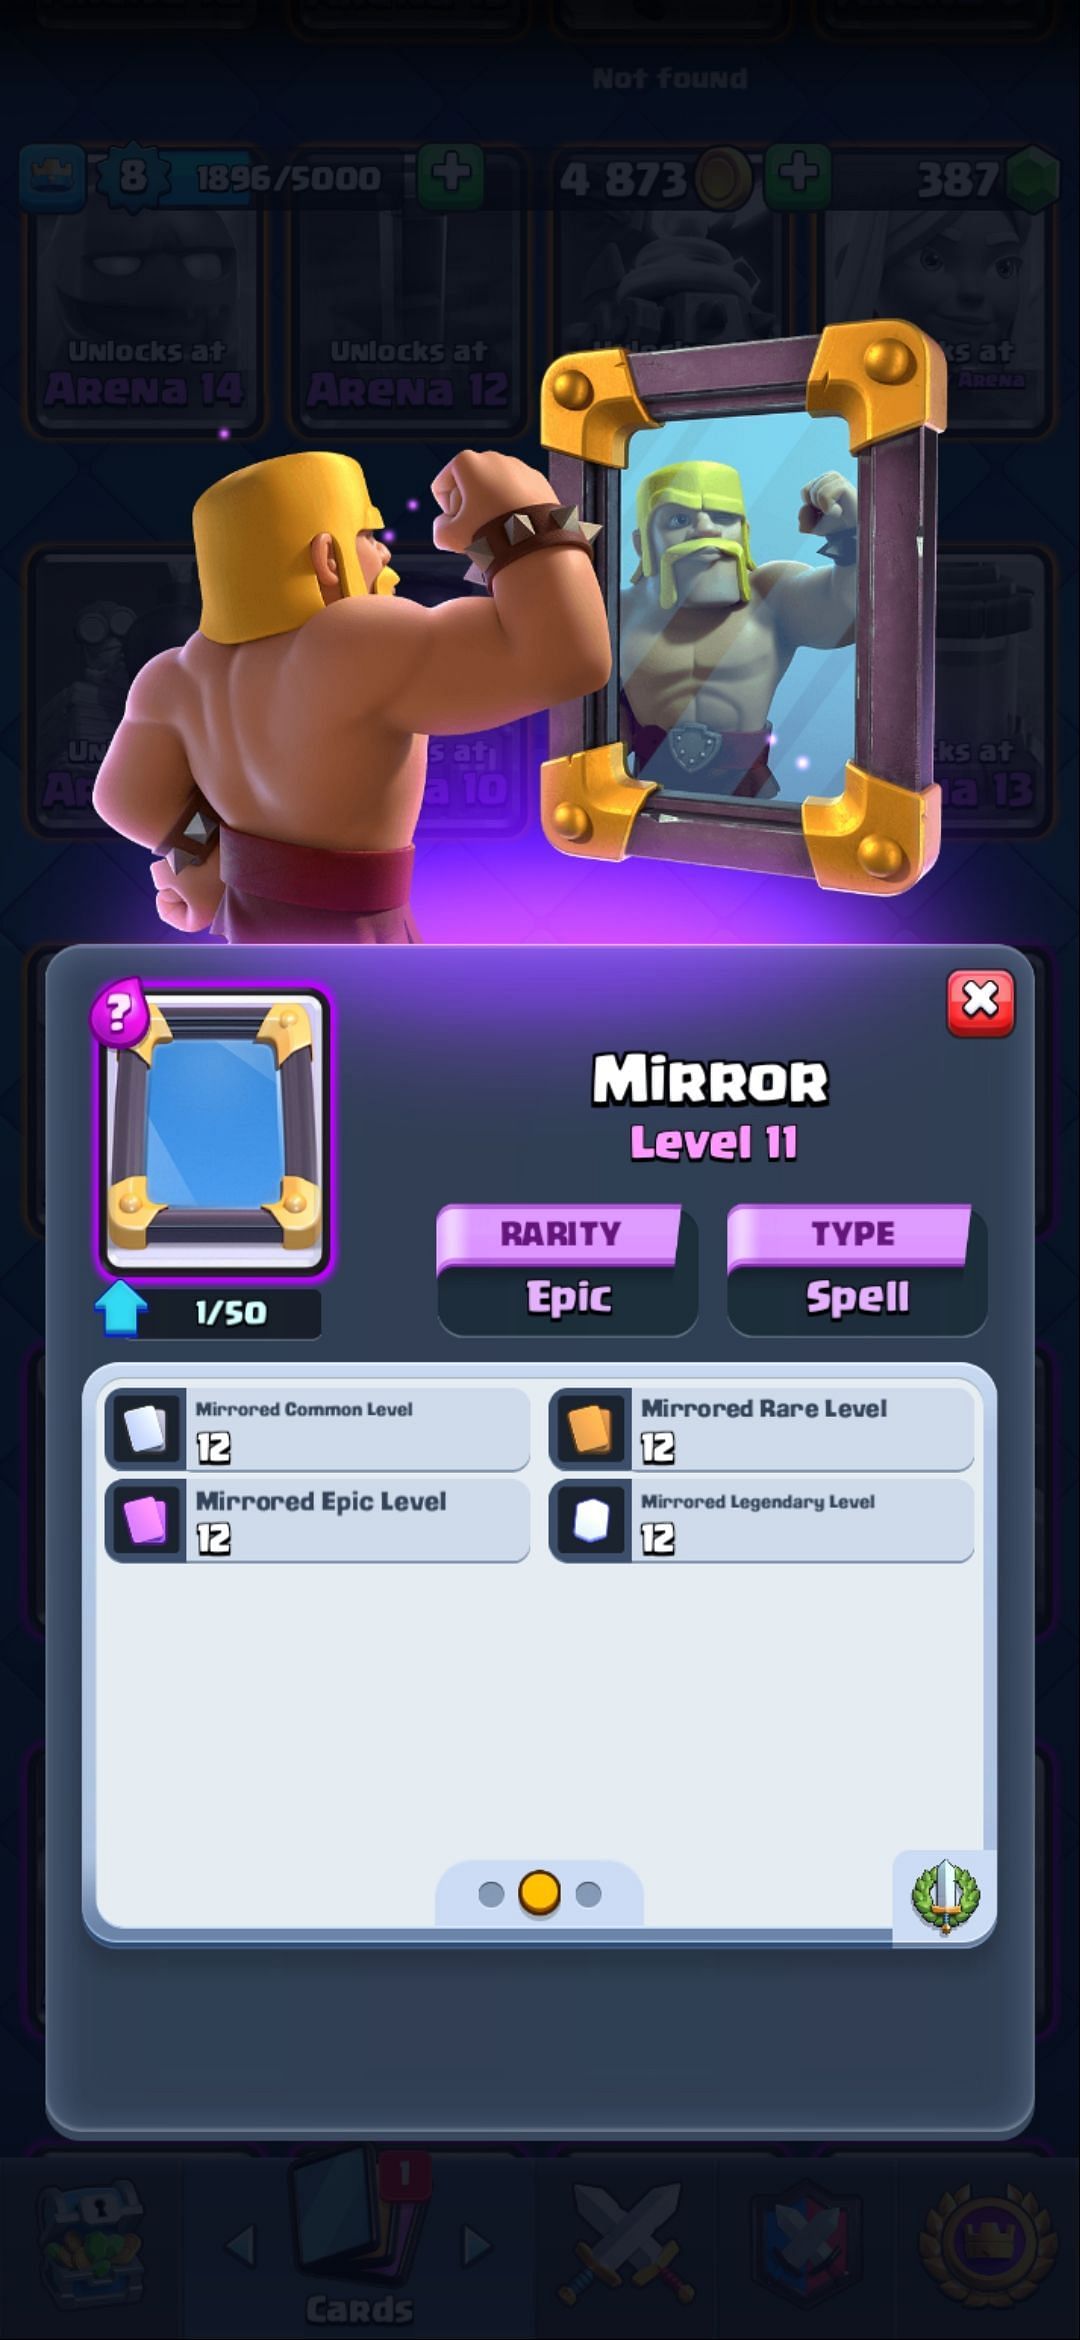 The Mirror card (Image via Supercell)